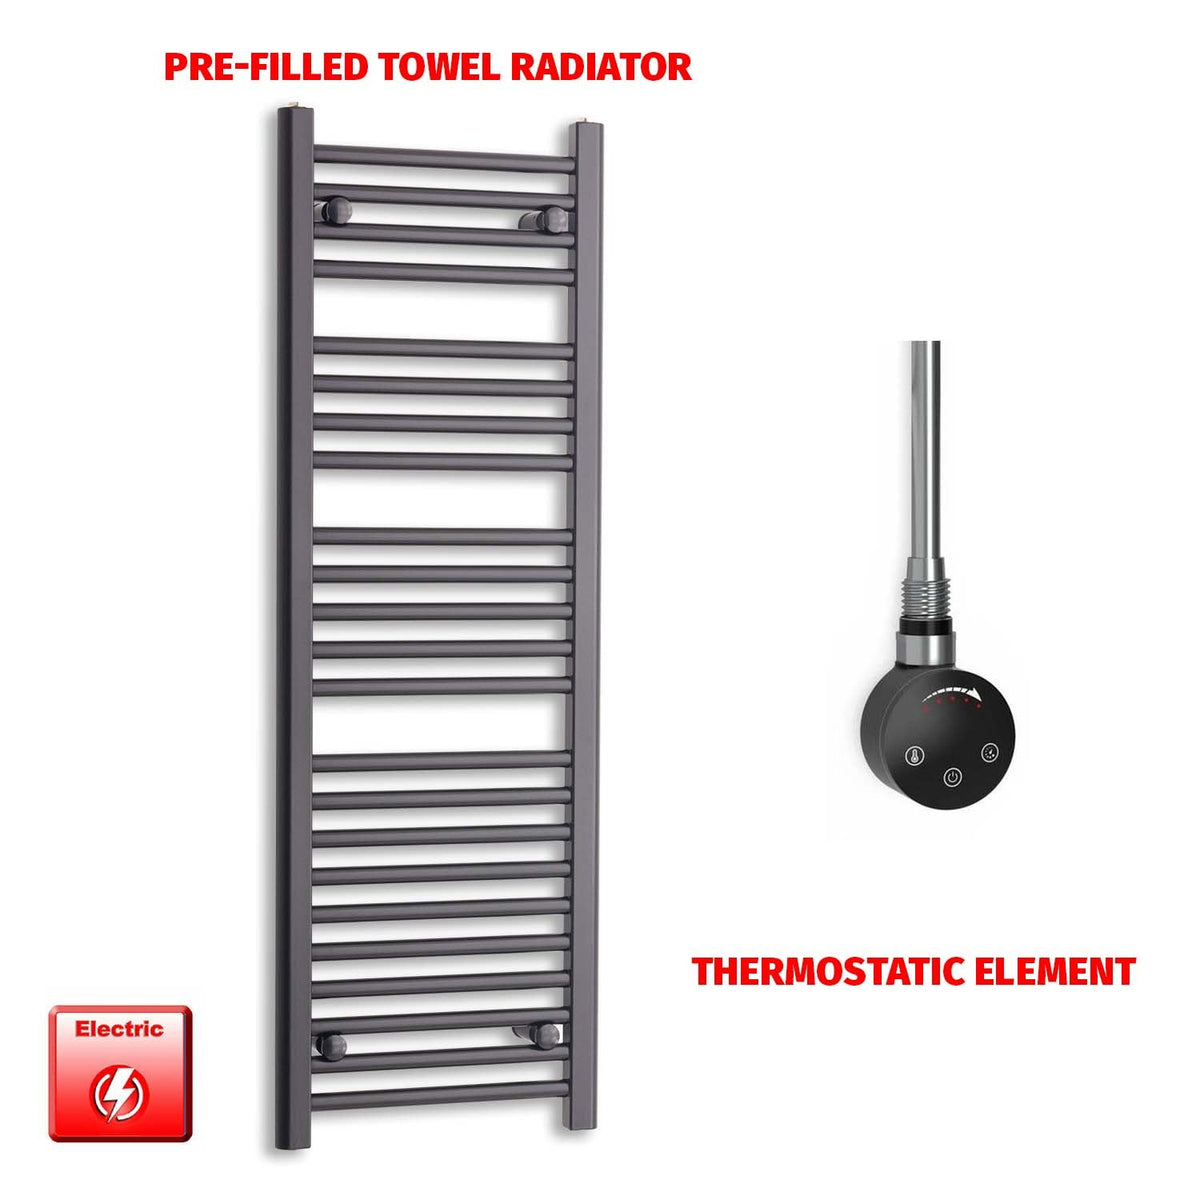 1200mm High 450mm Wide Flat Black Pre-Filled Electric Heated Towel Rail Radiator HTR Smart Thermostatic